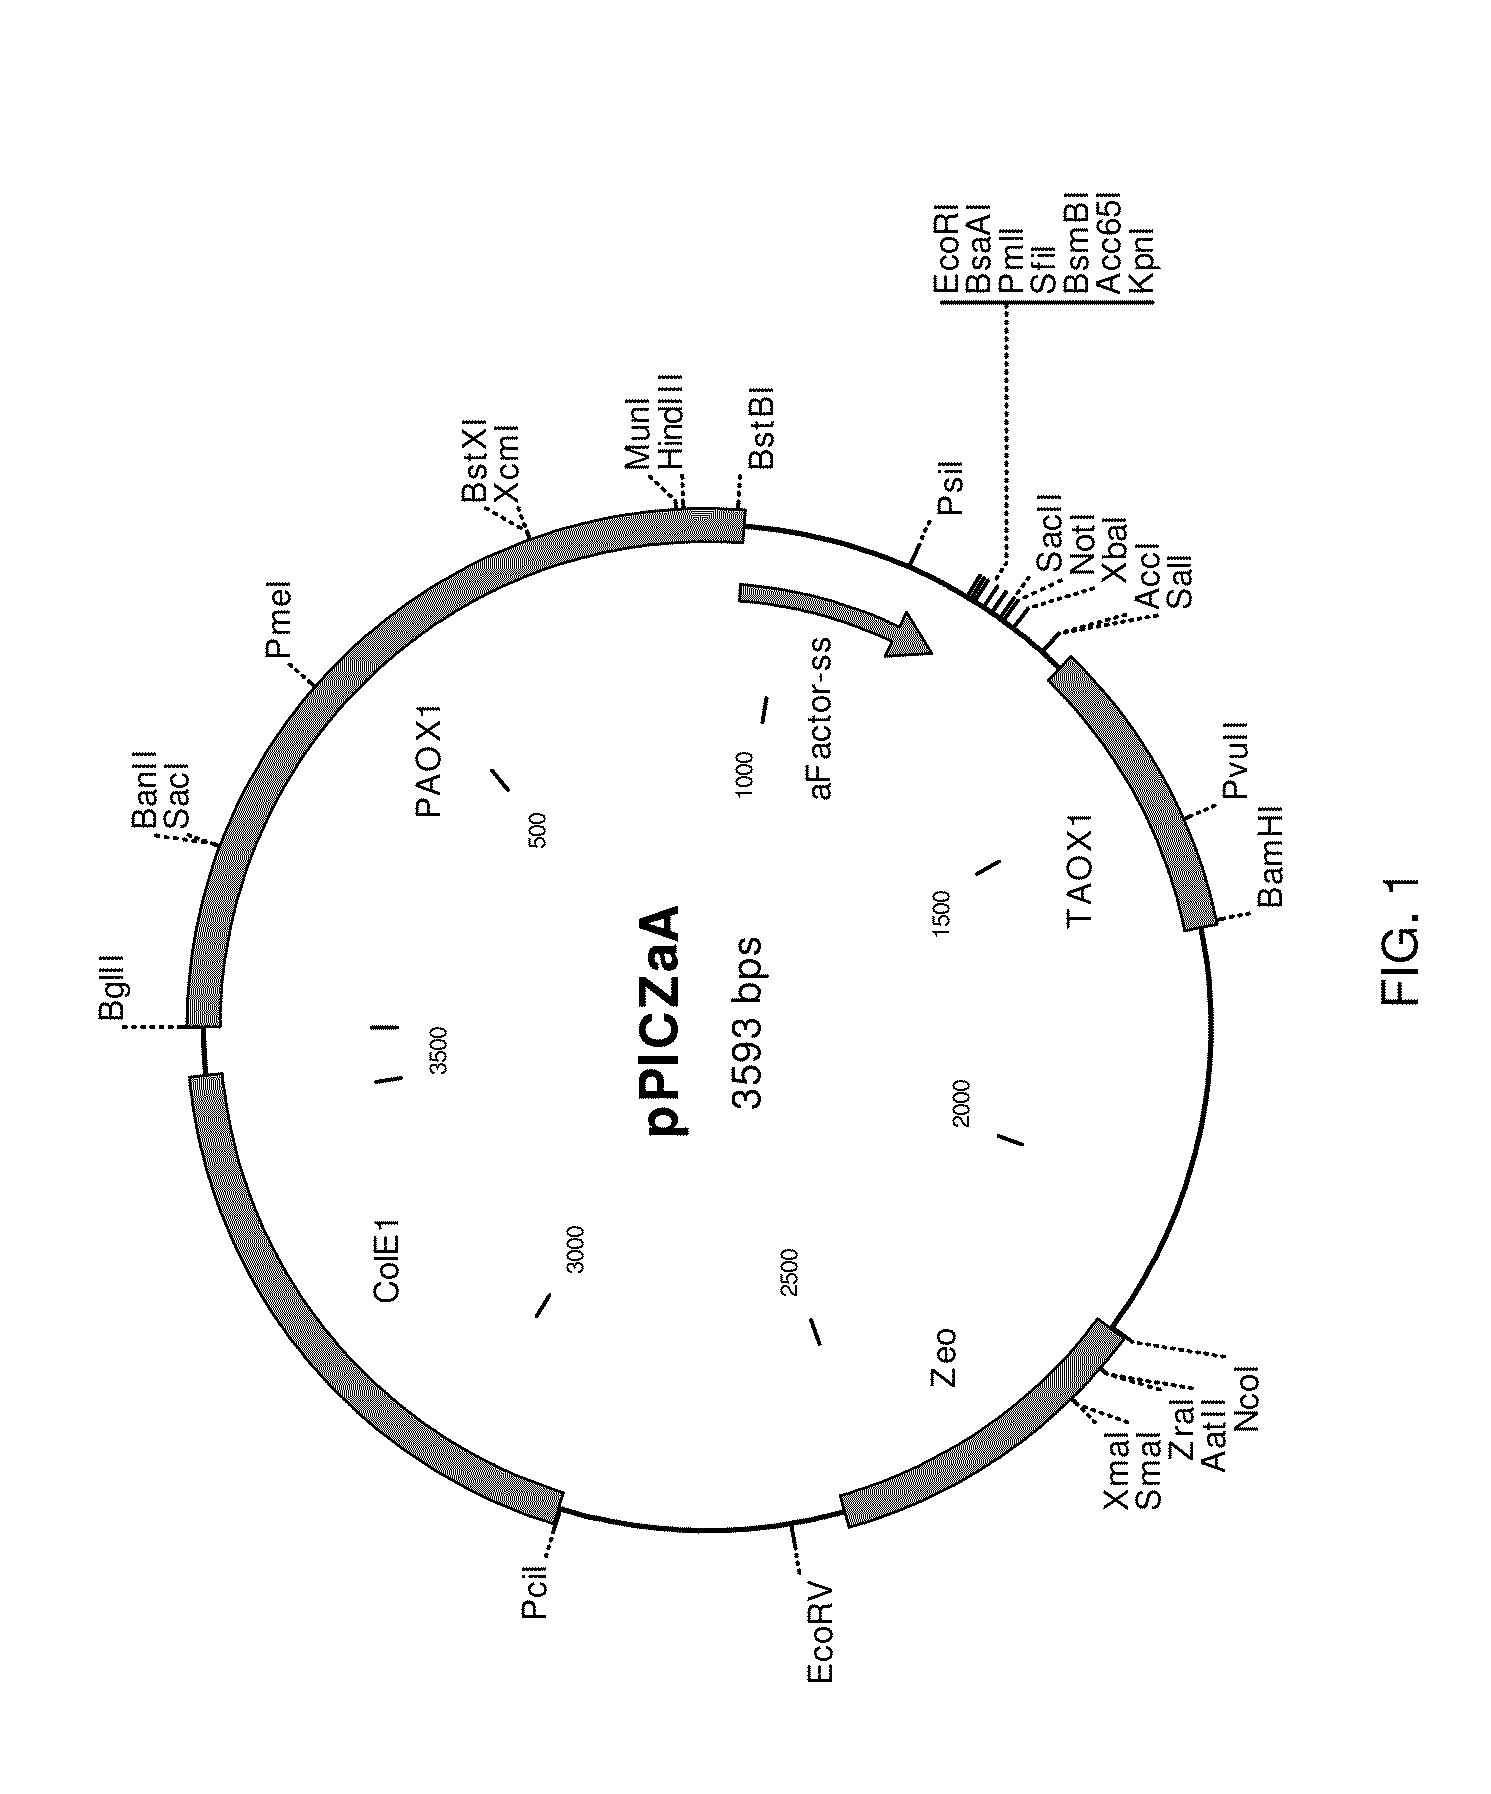 Glycosylated modified flavin adenine dinucleotide-dependent glucose dehydrogenases, compositions thereof as well as methods of making and using the same